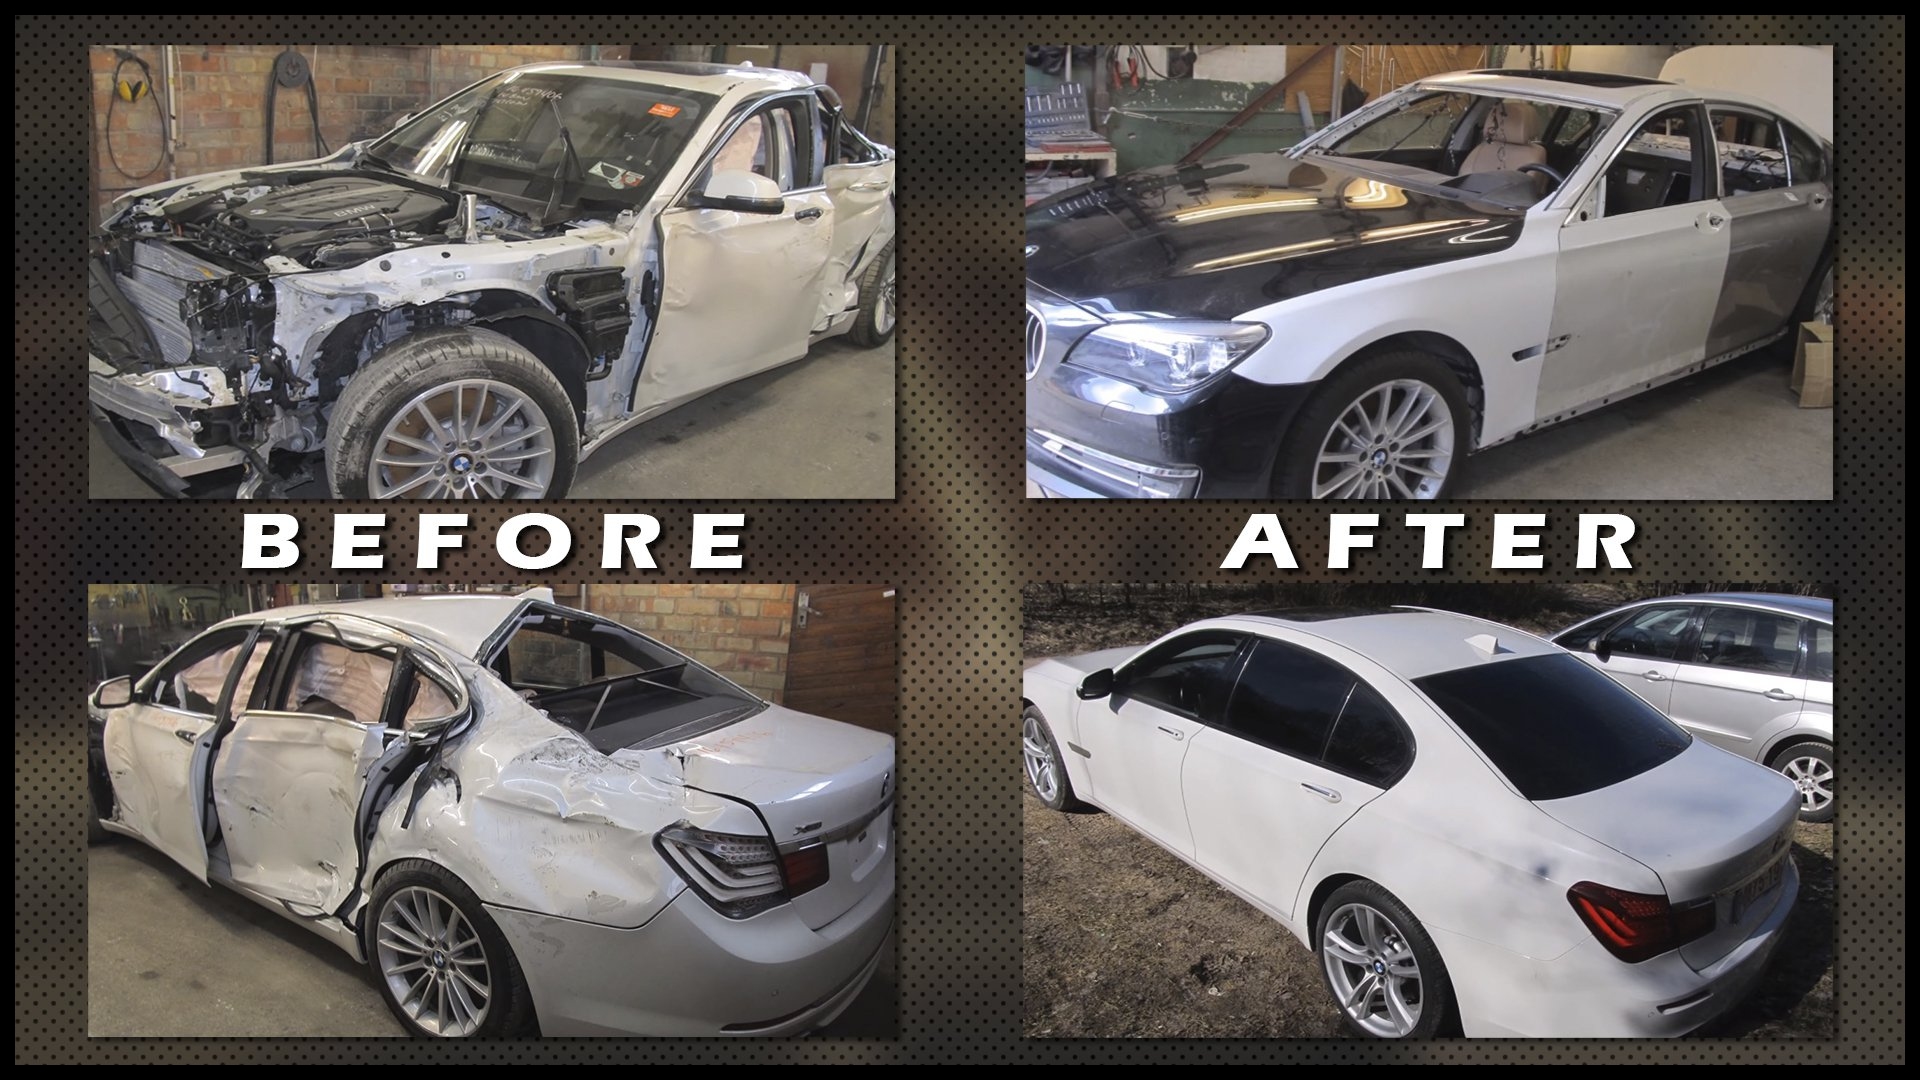 Watch This Russian Body Shop pletely Repair a Totaled BMW 7 Series The Drive